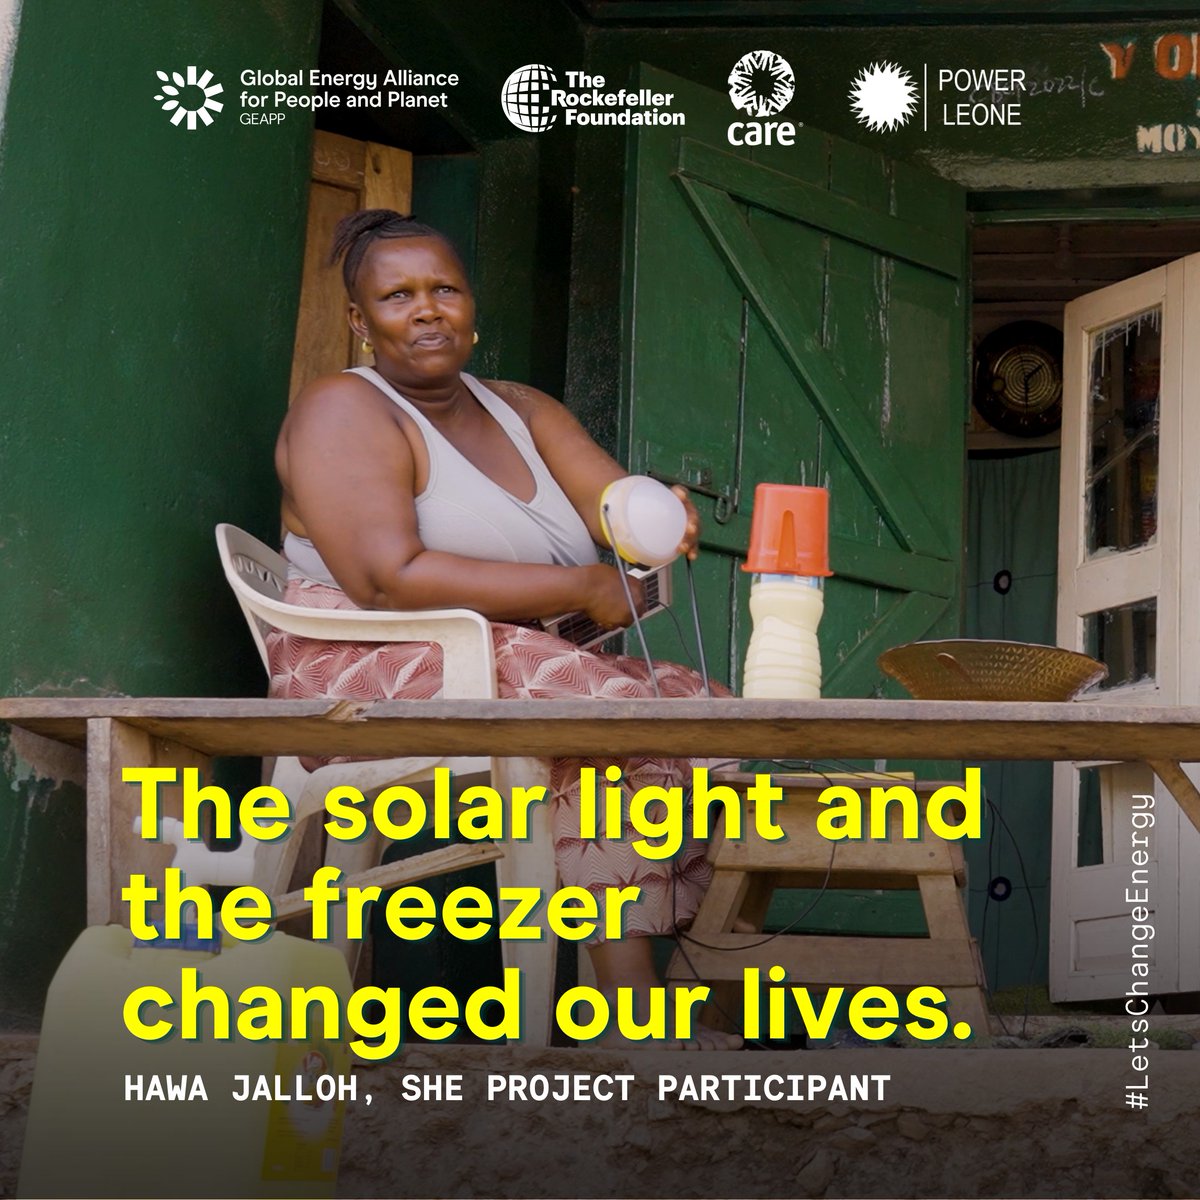 Hawa is one of the 8k women in Sierra Leone being supported by the Solar Harnessed Entrepreneurs (SHE) Project by @CARE @RockefellerFdn @EnergyAlliance. Watch how this $2.5m pilot project aims to help women expand their livelihoods through #cleanenergy💚 youtu.be/nK-ceJvPHxE